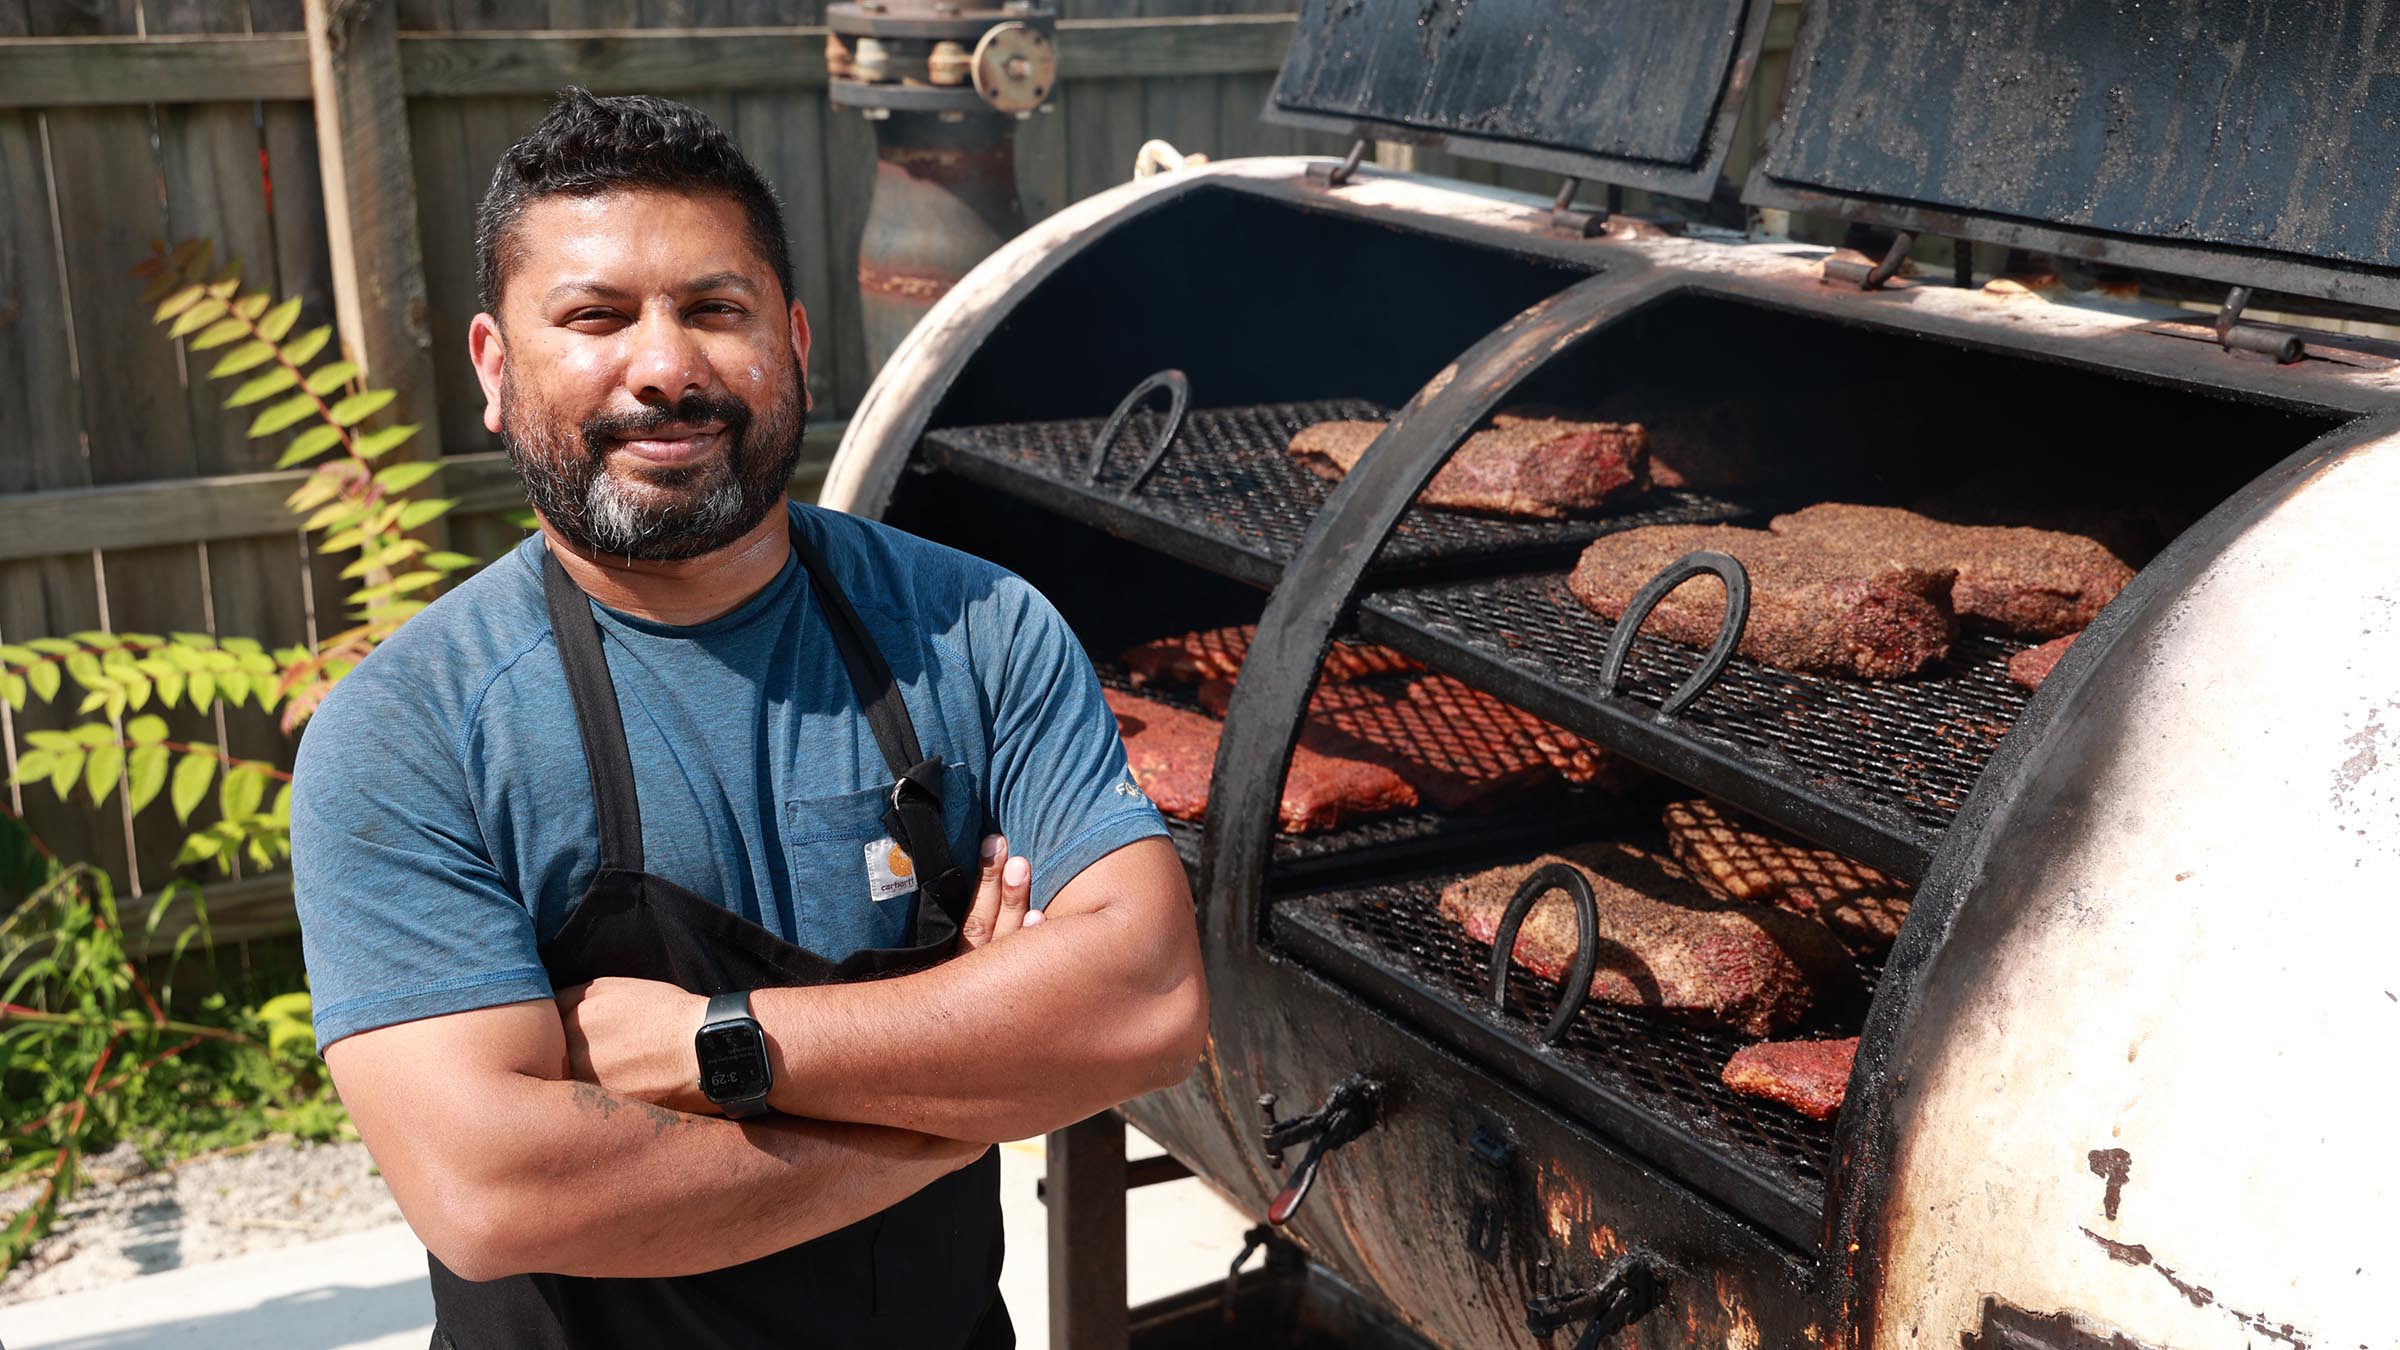 Ryan Fernandez is the owner of Southern Junction which just opened its new location at 365 Connecticut St. in Buffalo. Born and raised in Texas, he brings his southern flair of barbecue. The star of the show is the smoker which he uses to cook all of their meats. Photo taken Thursday Aug. 3, 2023. Photo by Sharon Cantillon.